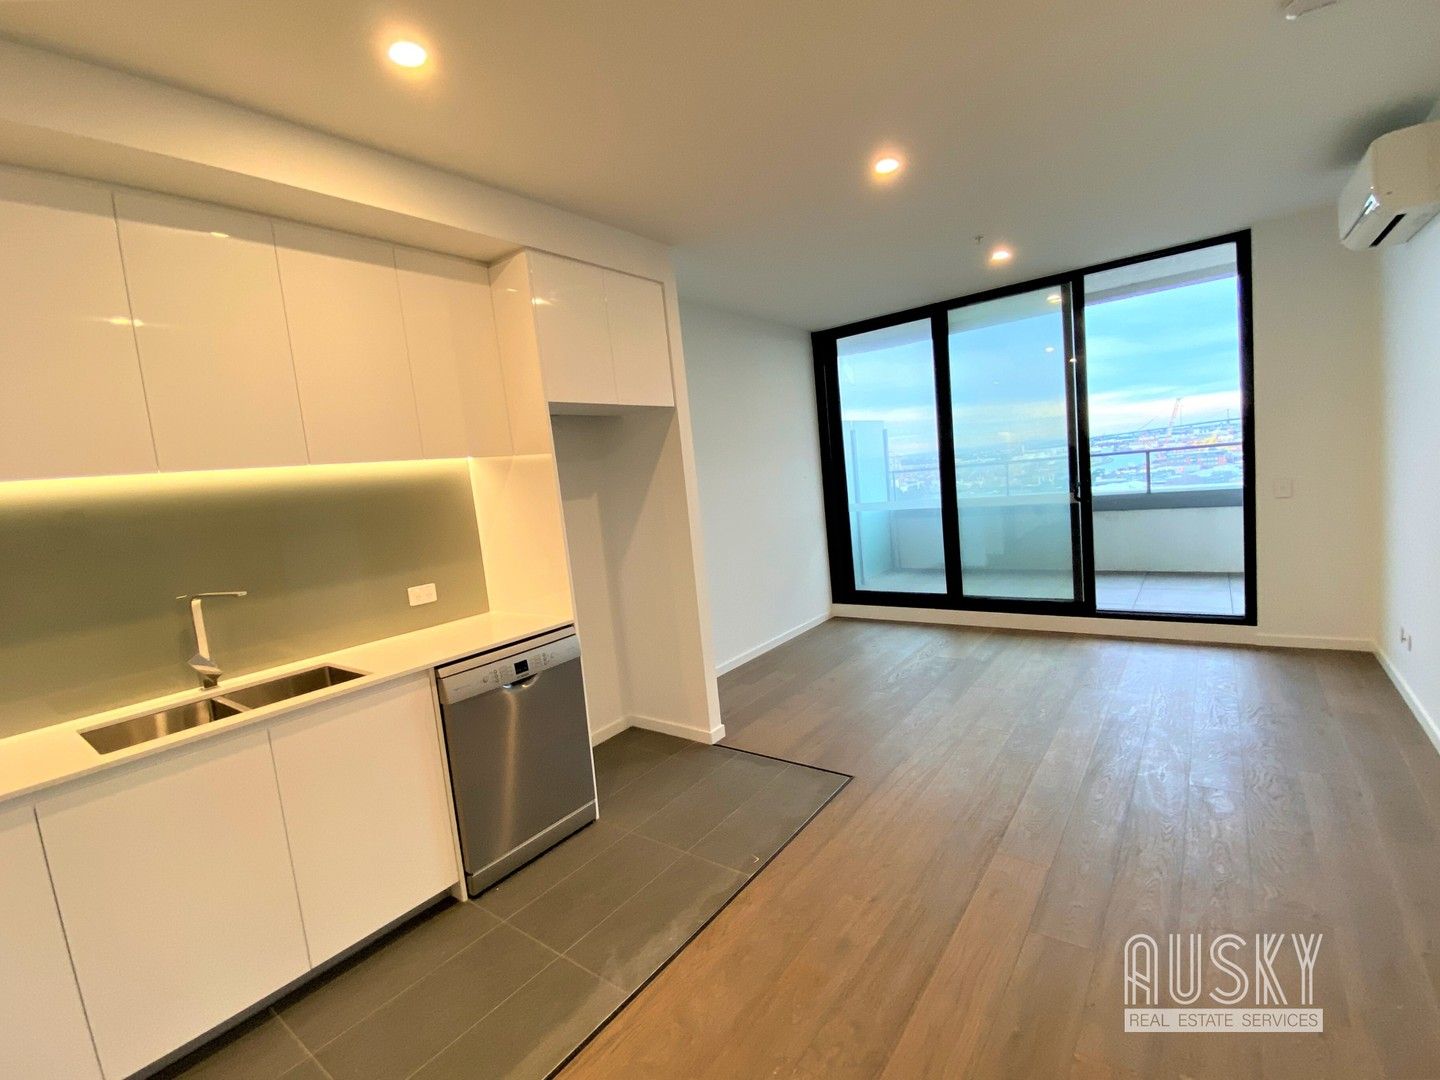 2 bedrooms Apartment / Unit / Flat in 1106C/2 Tannery Walk FOOTSCRAY VIC, 3011